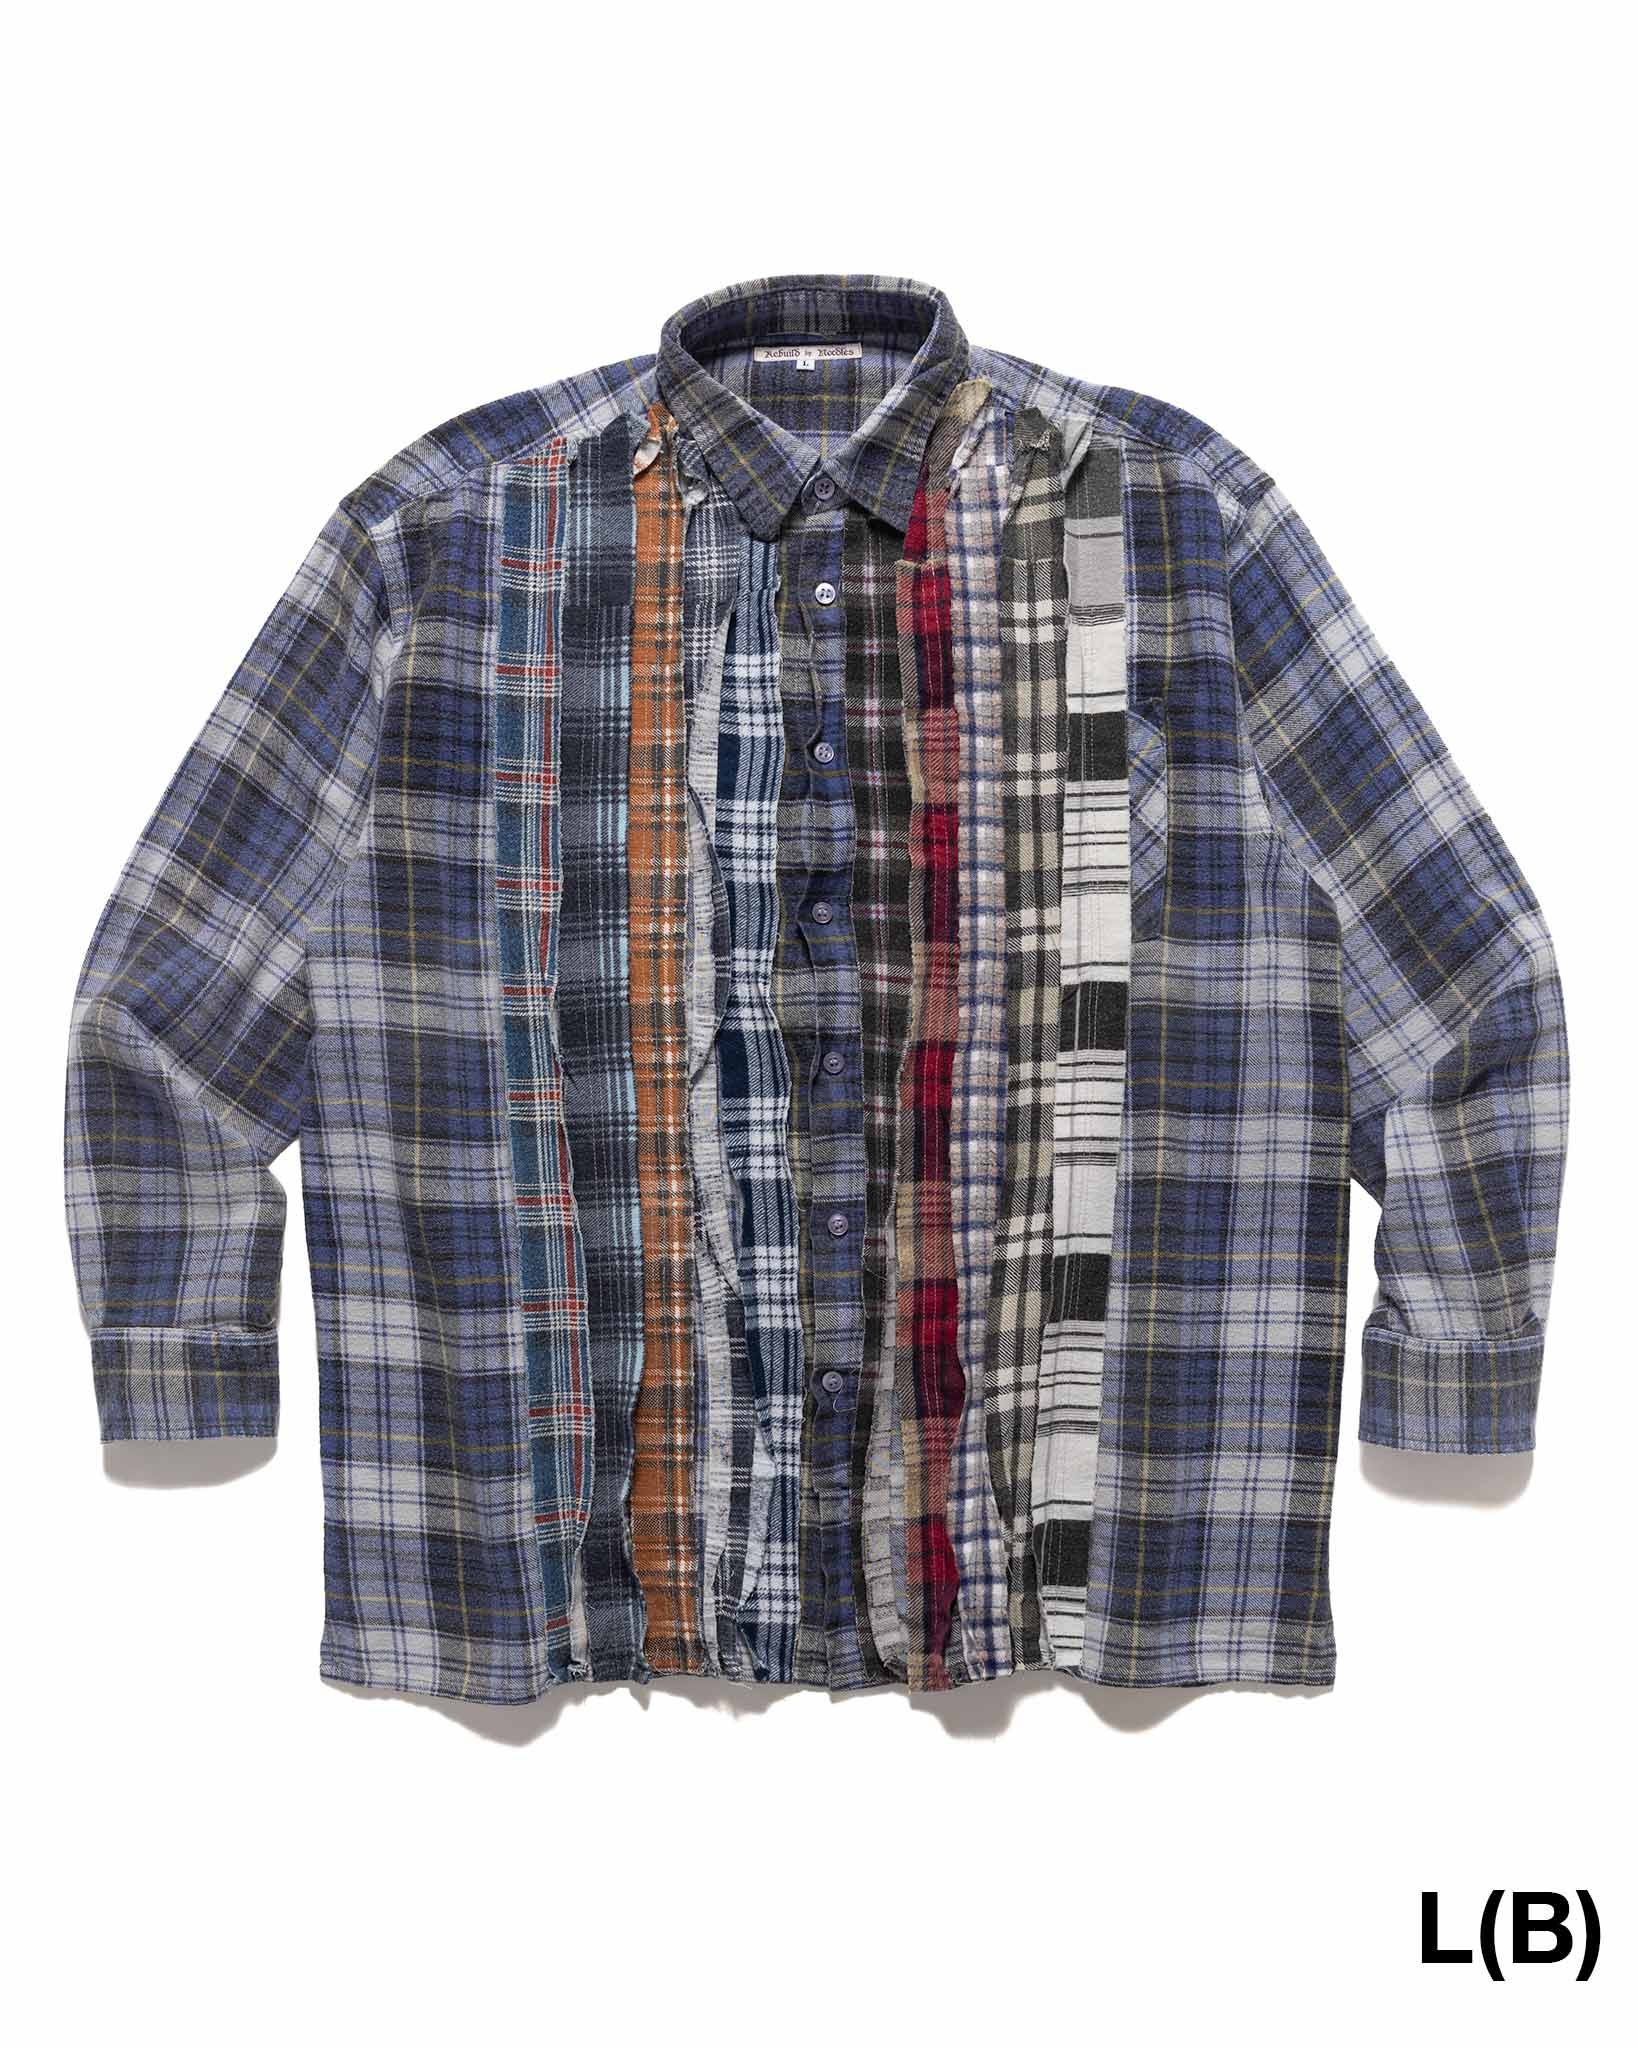 Rebuild by Needles Flannel Shirt -> Ribbon Shirt Assorted - 14